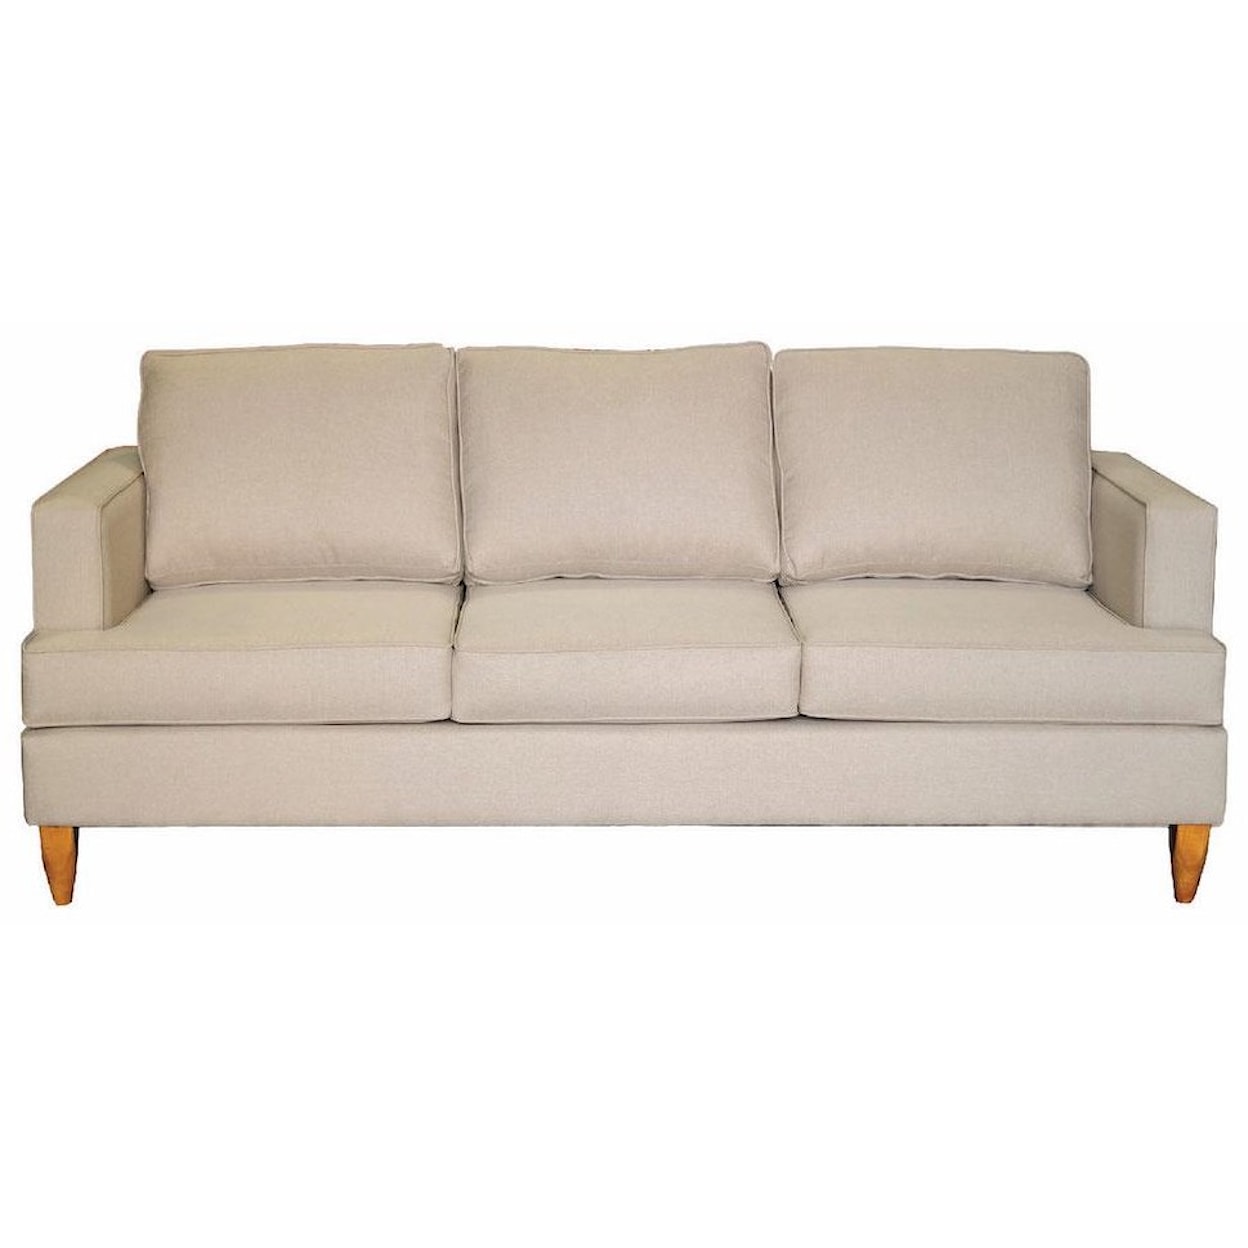 Sussex Upholstery Co. Grace 3 Cushion Sofa